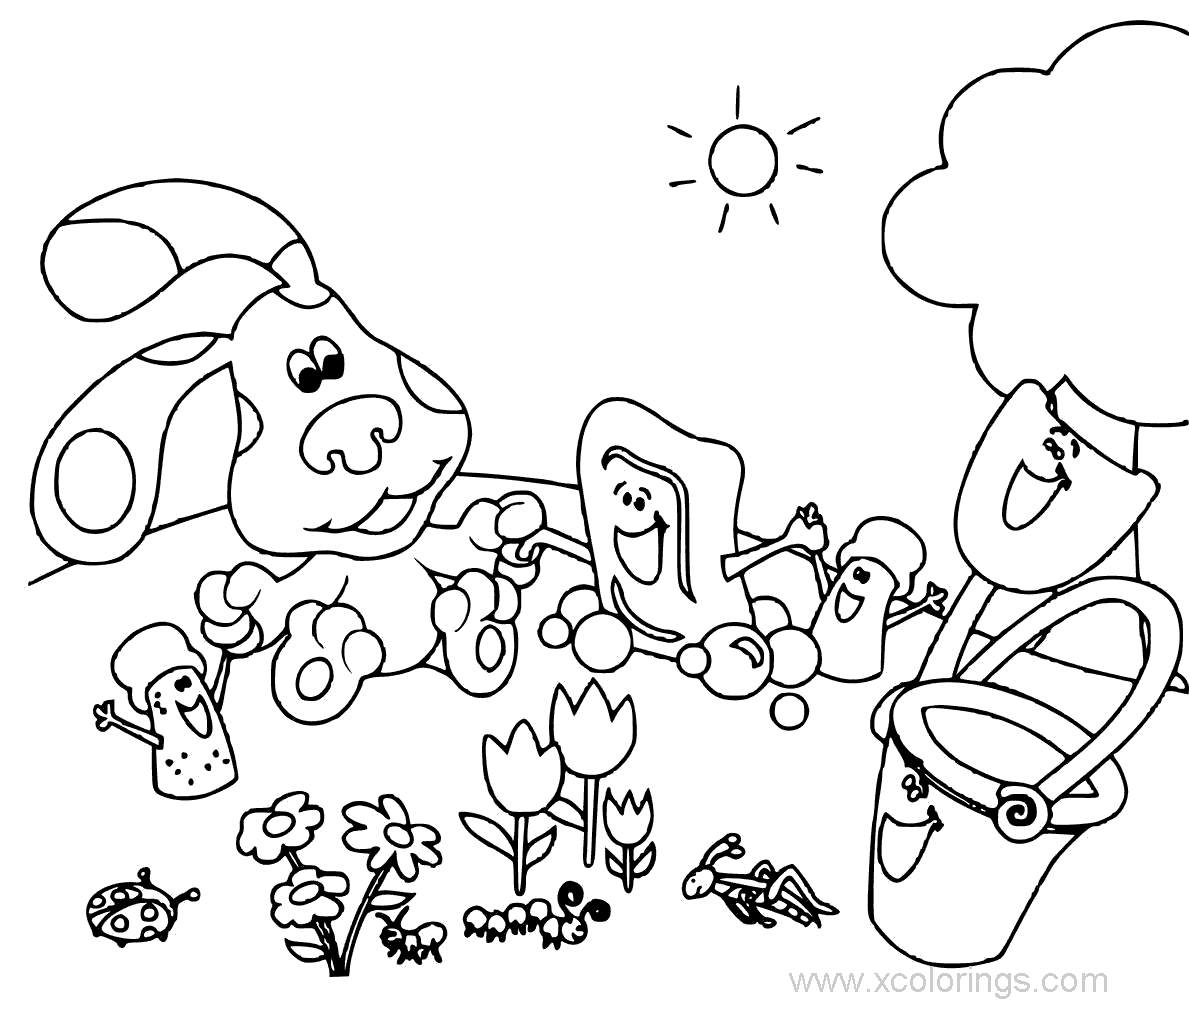 Free Blues Clues Characters Coloring Pages printable